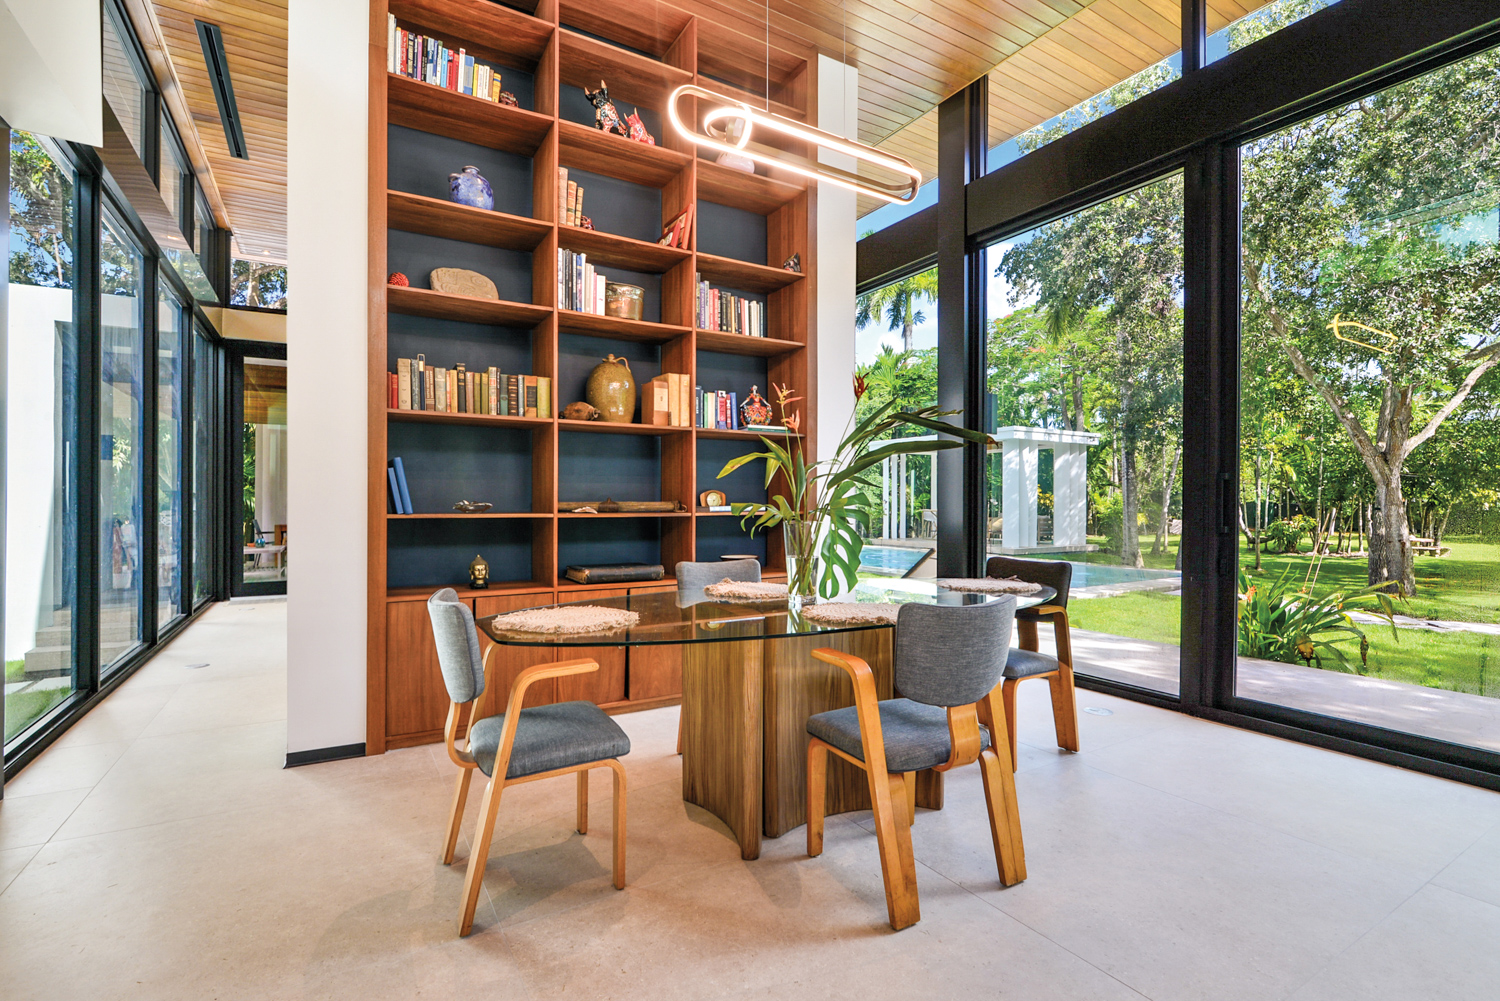 Floor-to-ceiling built-in wood bookcases by Simpatco Architectural Surfaces center a dining space